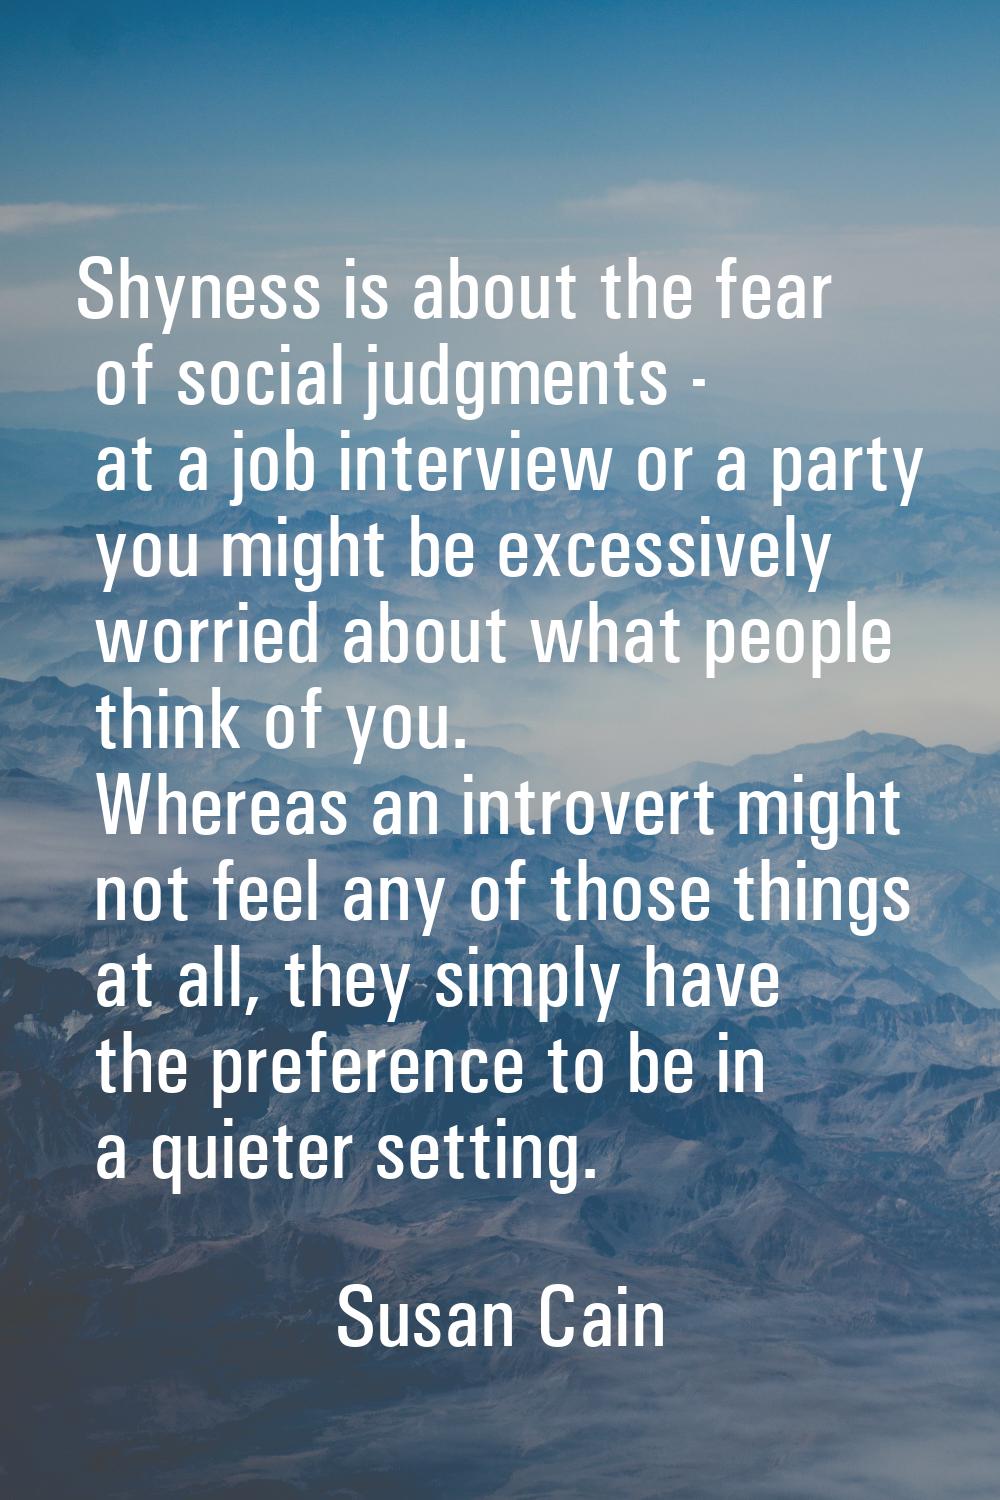 Shyness is about the fear of social judgments - at a job interview or a party you might be excessiv